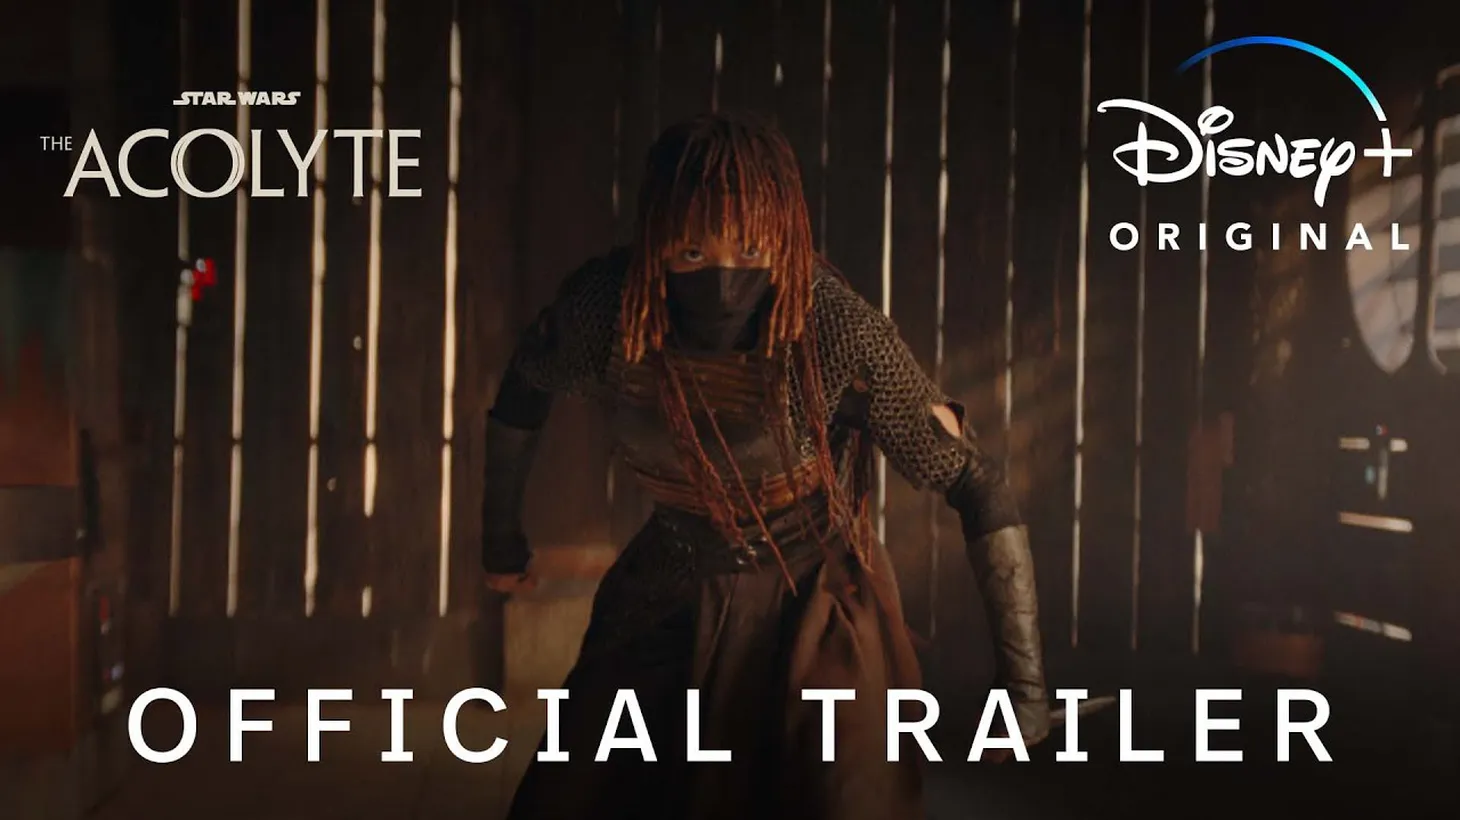 “The Acolyte” is the latest live-action TV show set in the “Star Wars” universe, and stars Amandla Stenberg, Jodie Turner-Smith, and Carrie-Anne Moss.